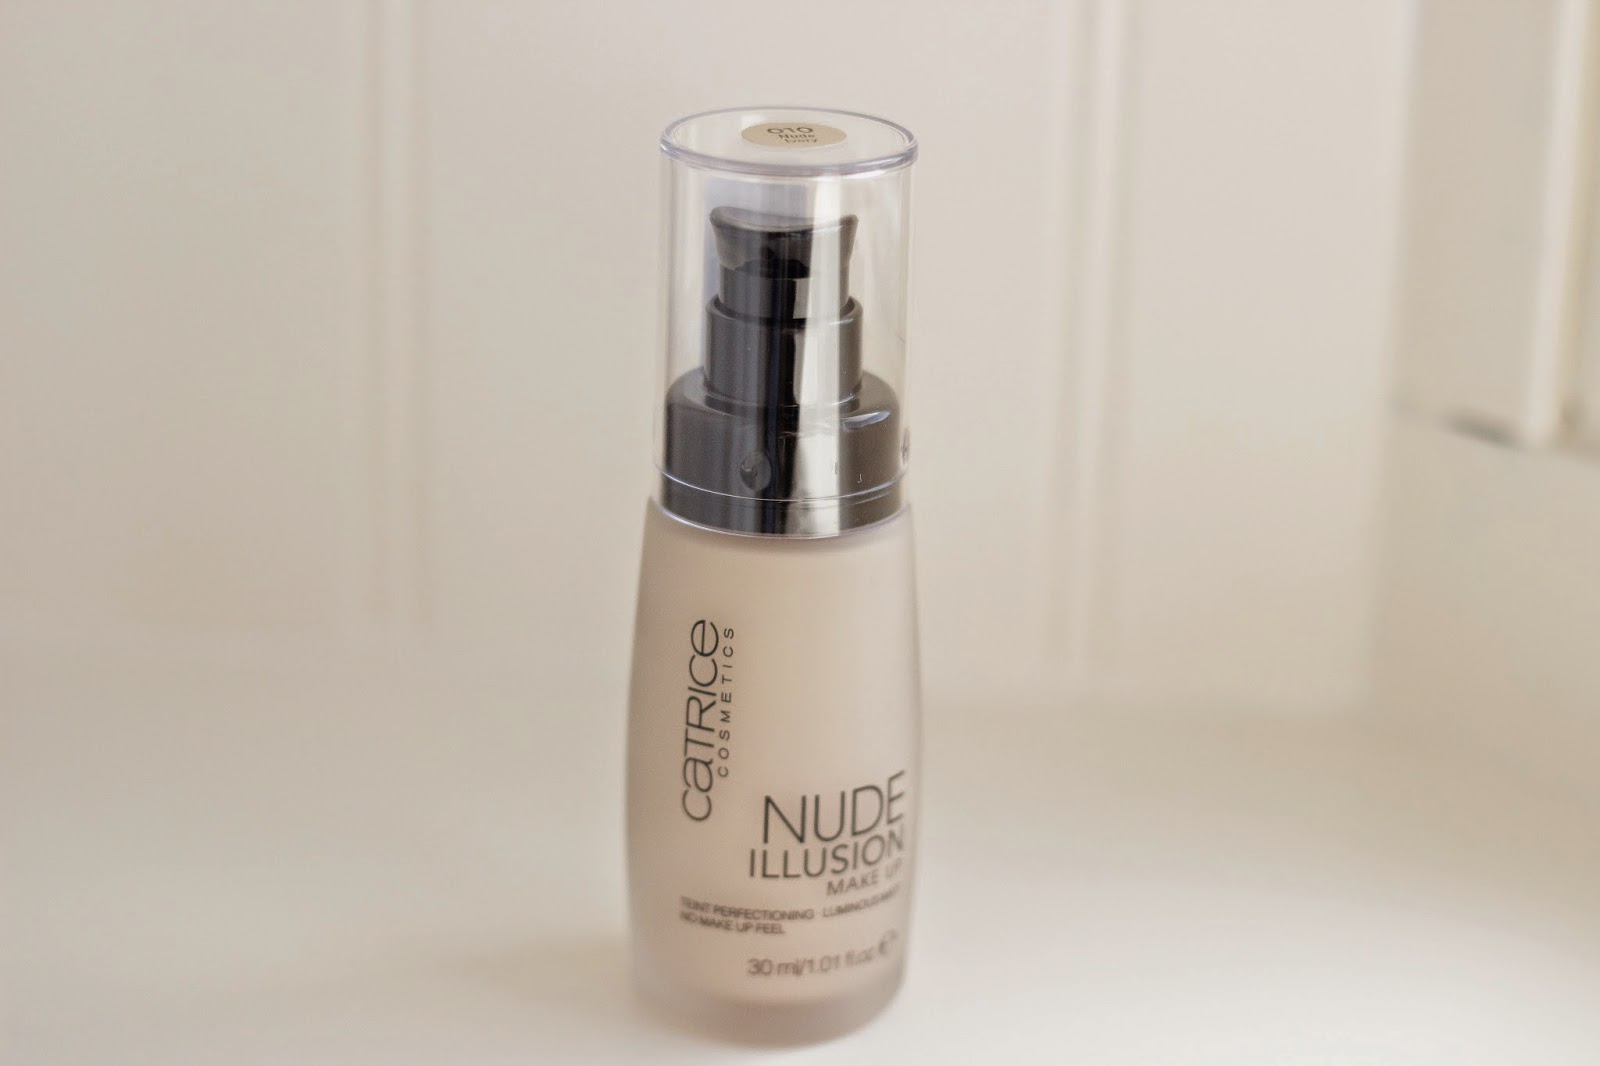 review catrice nude illusion foundation, catrice nude illusion foundation full face